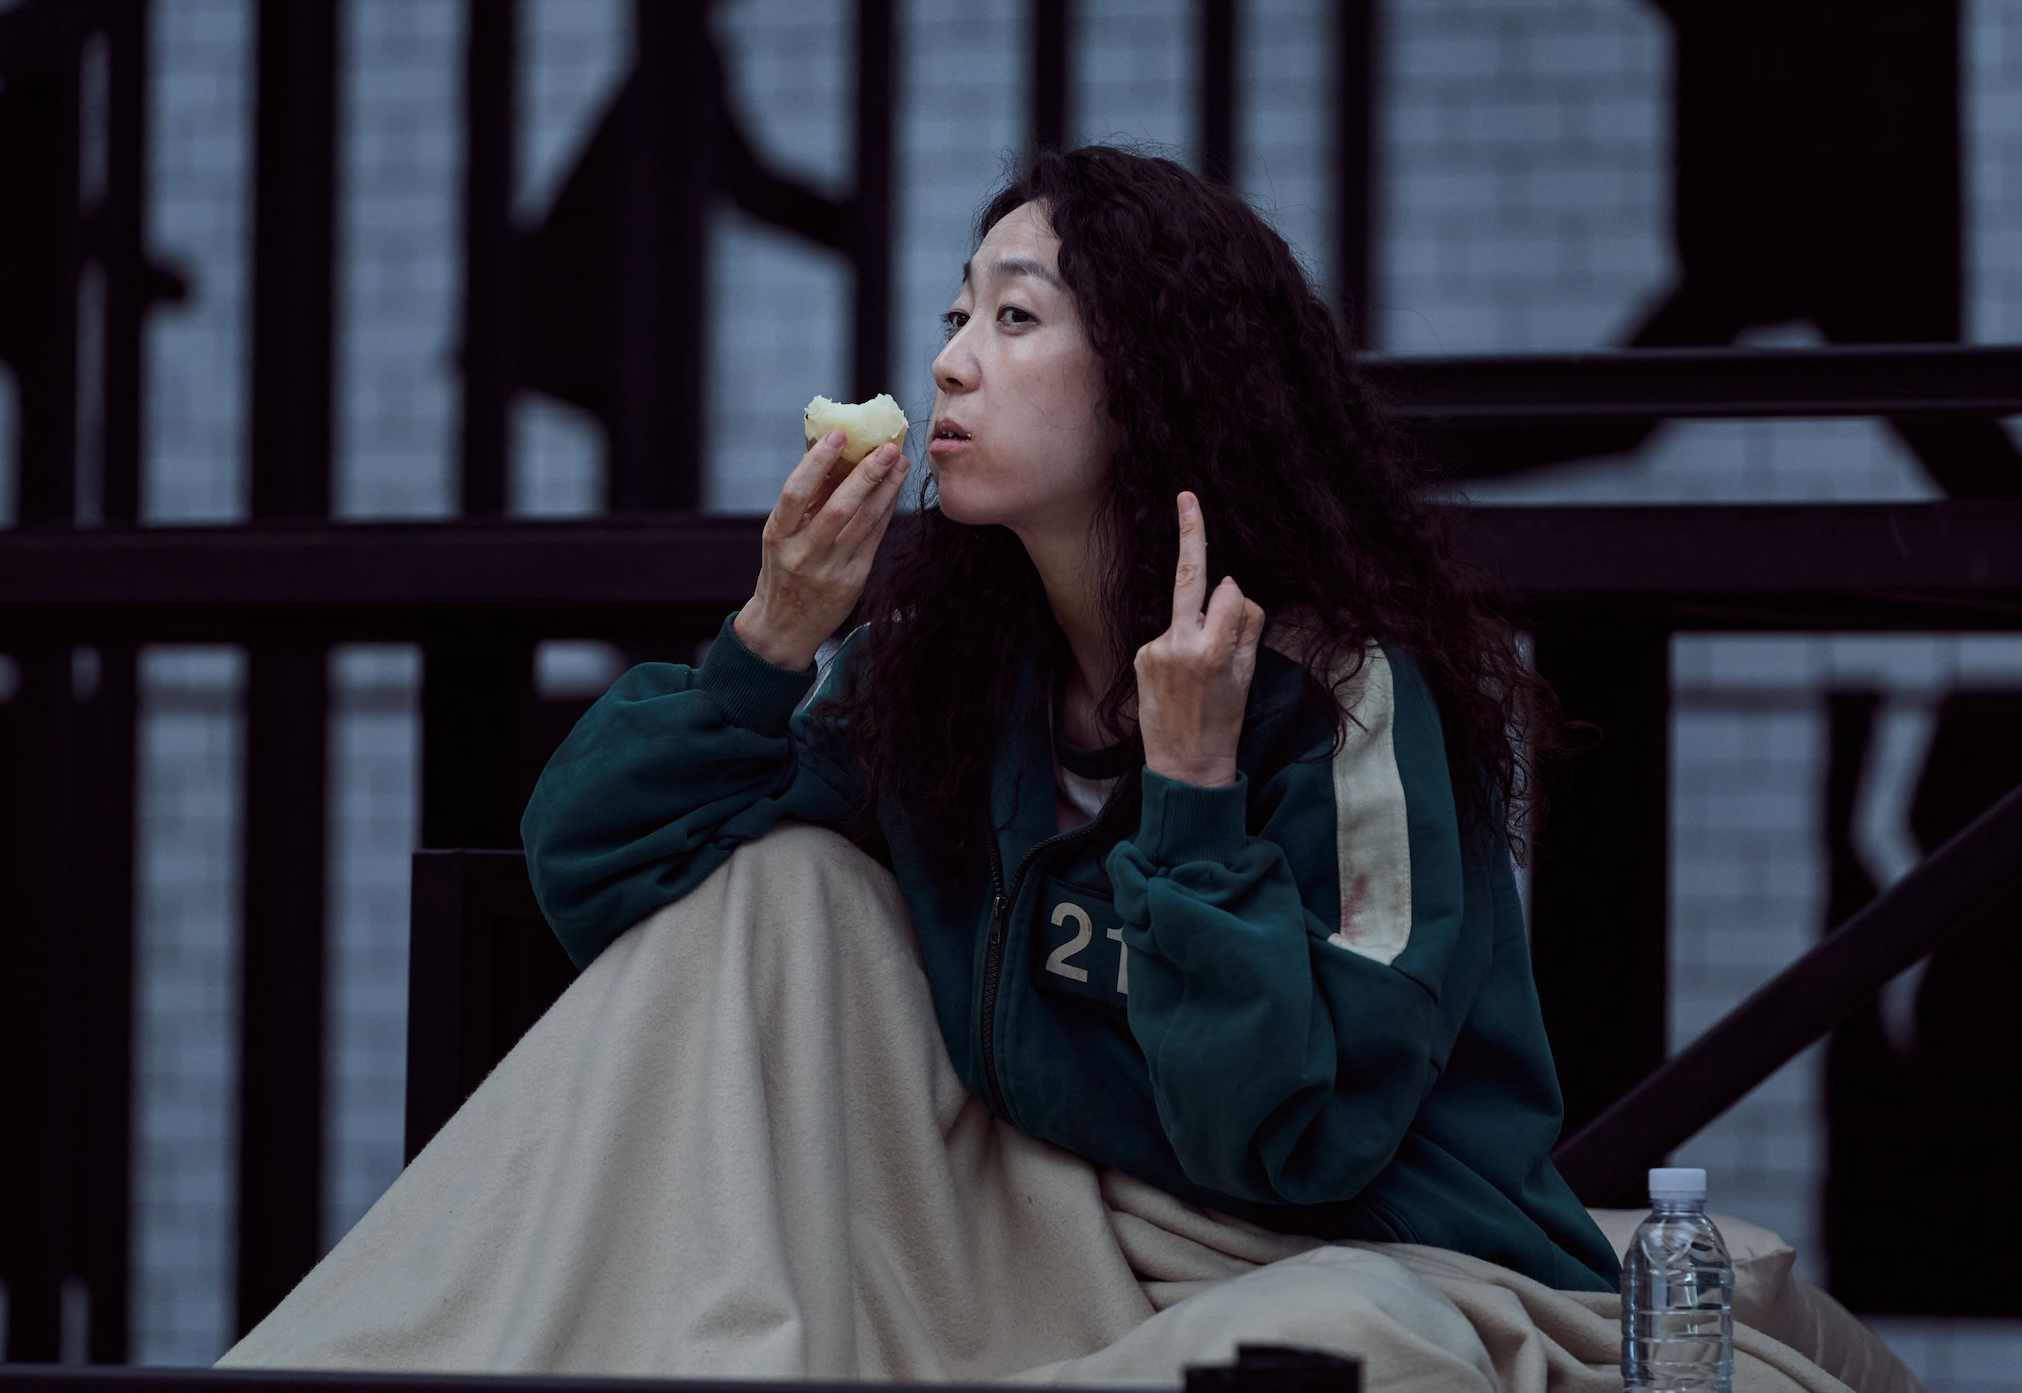 Han Mi-nyeo giving the middle finger as she sits in bed and has a snack